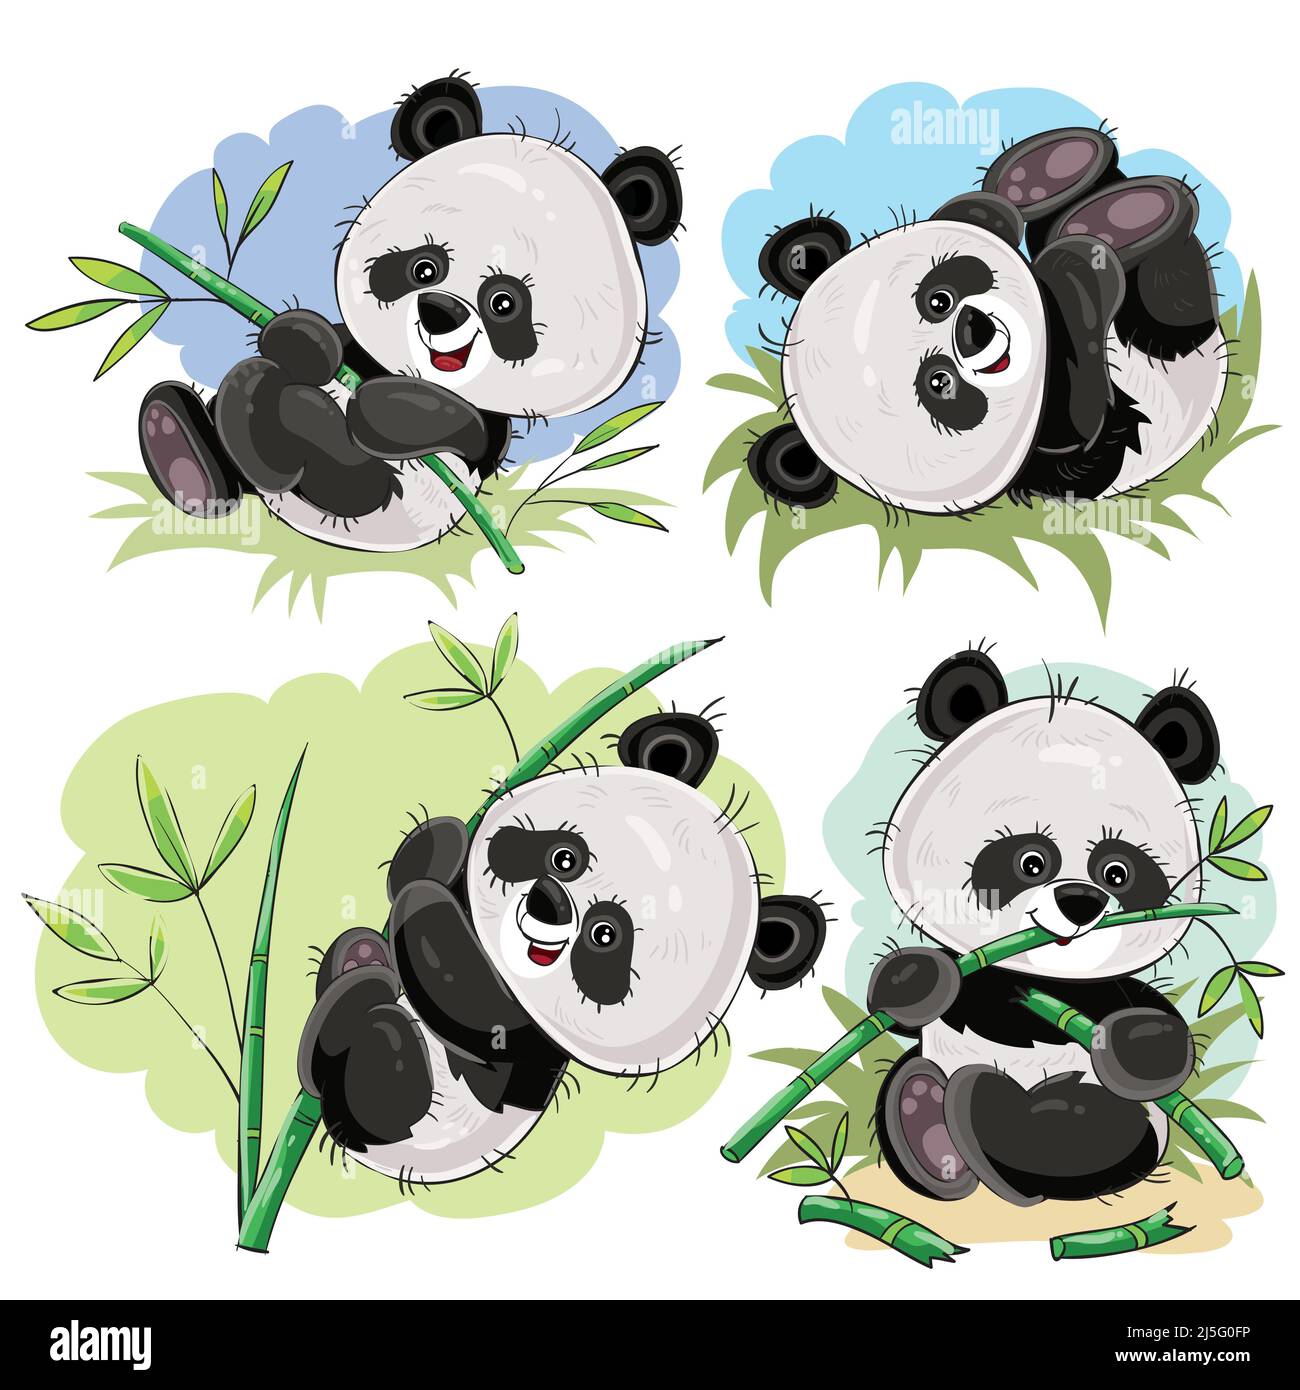 Funny panda bear baby playing on grass, climbing on bamboo stem, eating bamboo branch cartoon vectors set isolated on white background. Cute wild anim Stock Vector